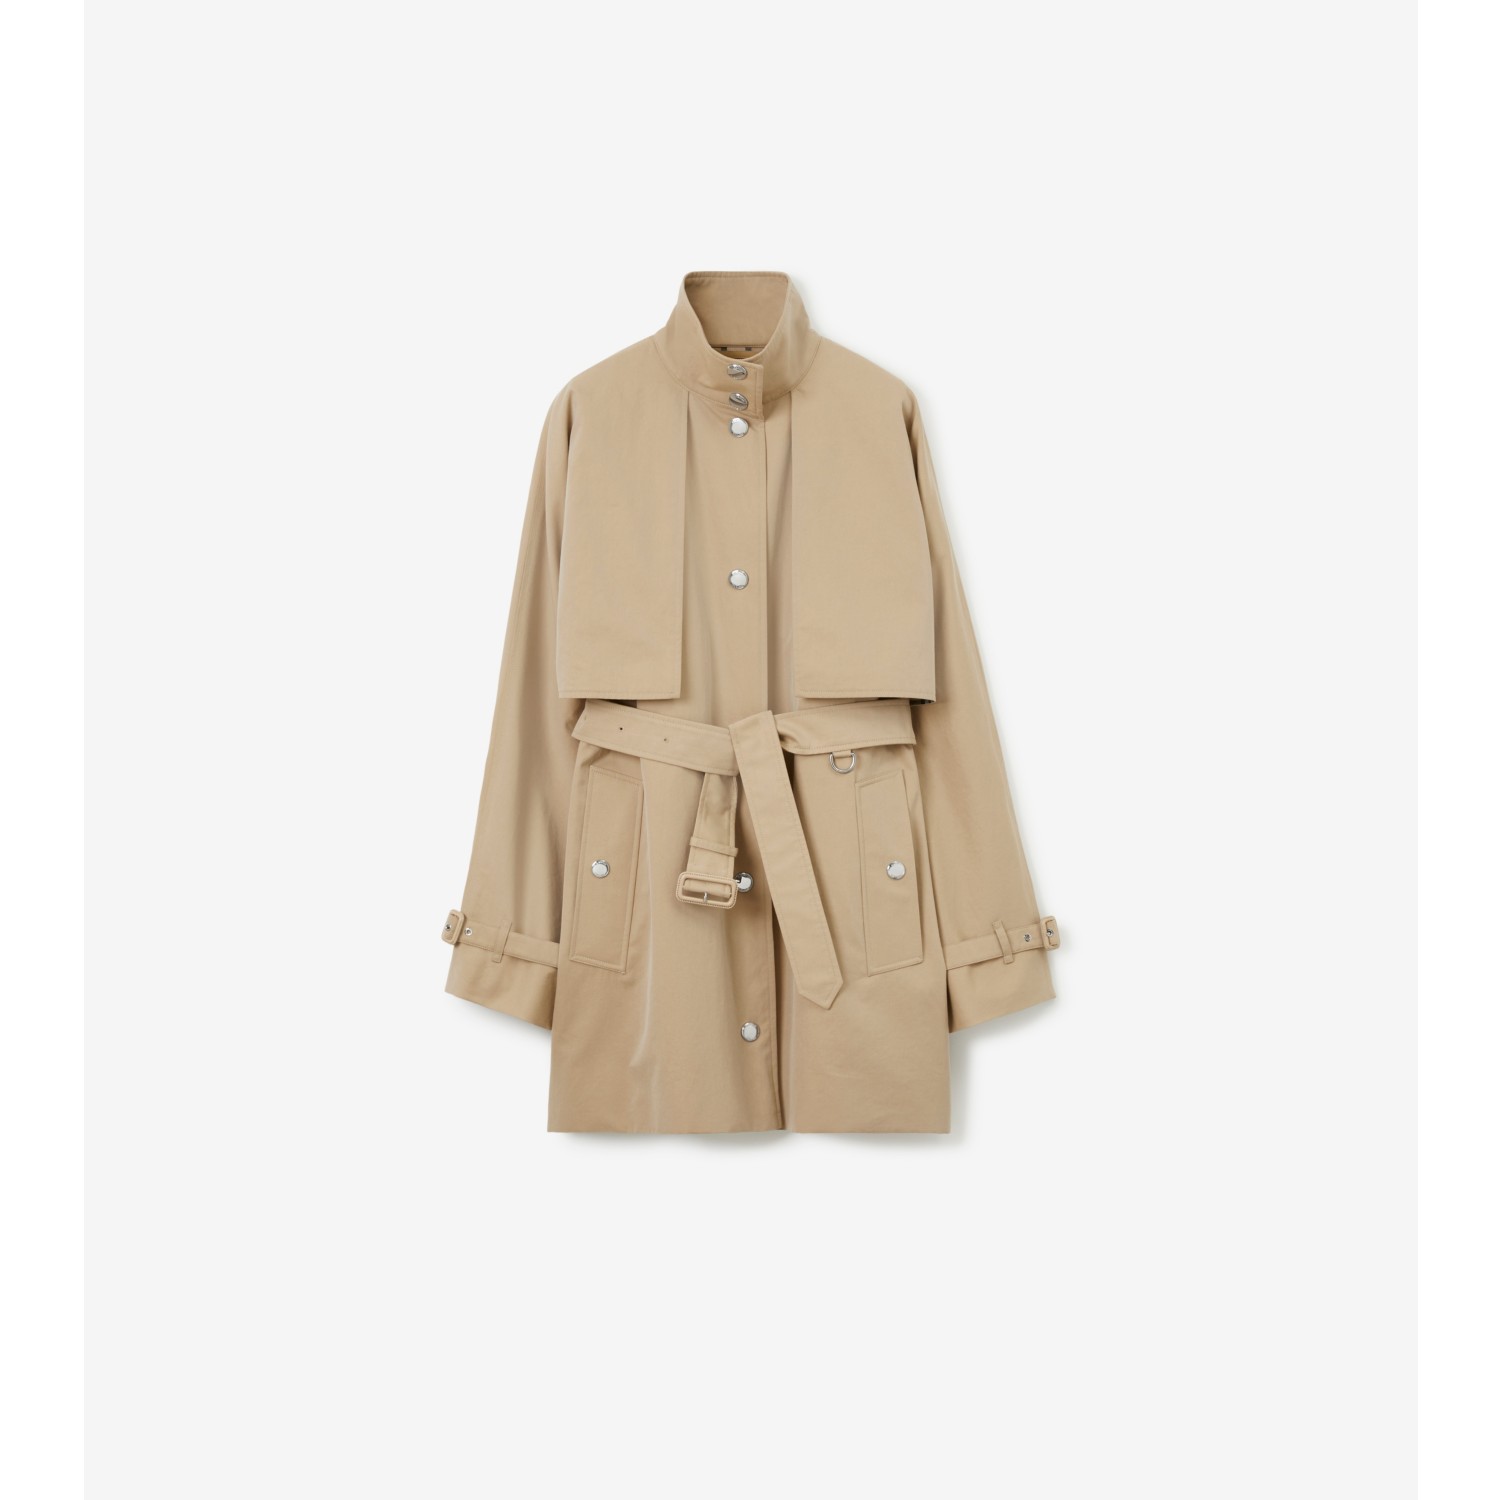 Fabric, fit and all the flaps: how to pick a trenchcoat that looks